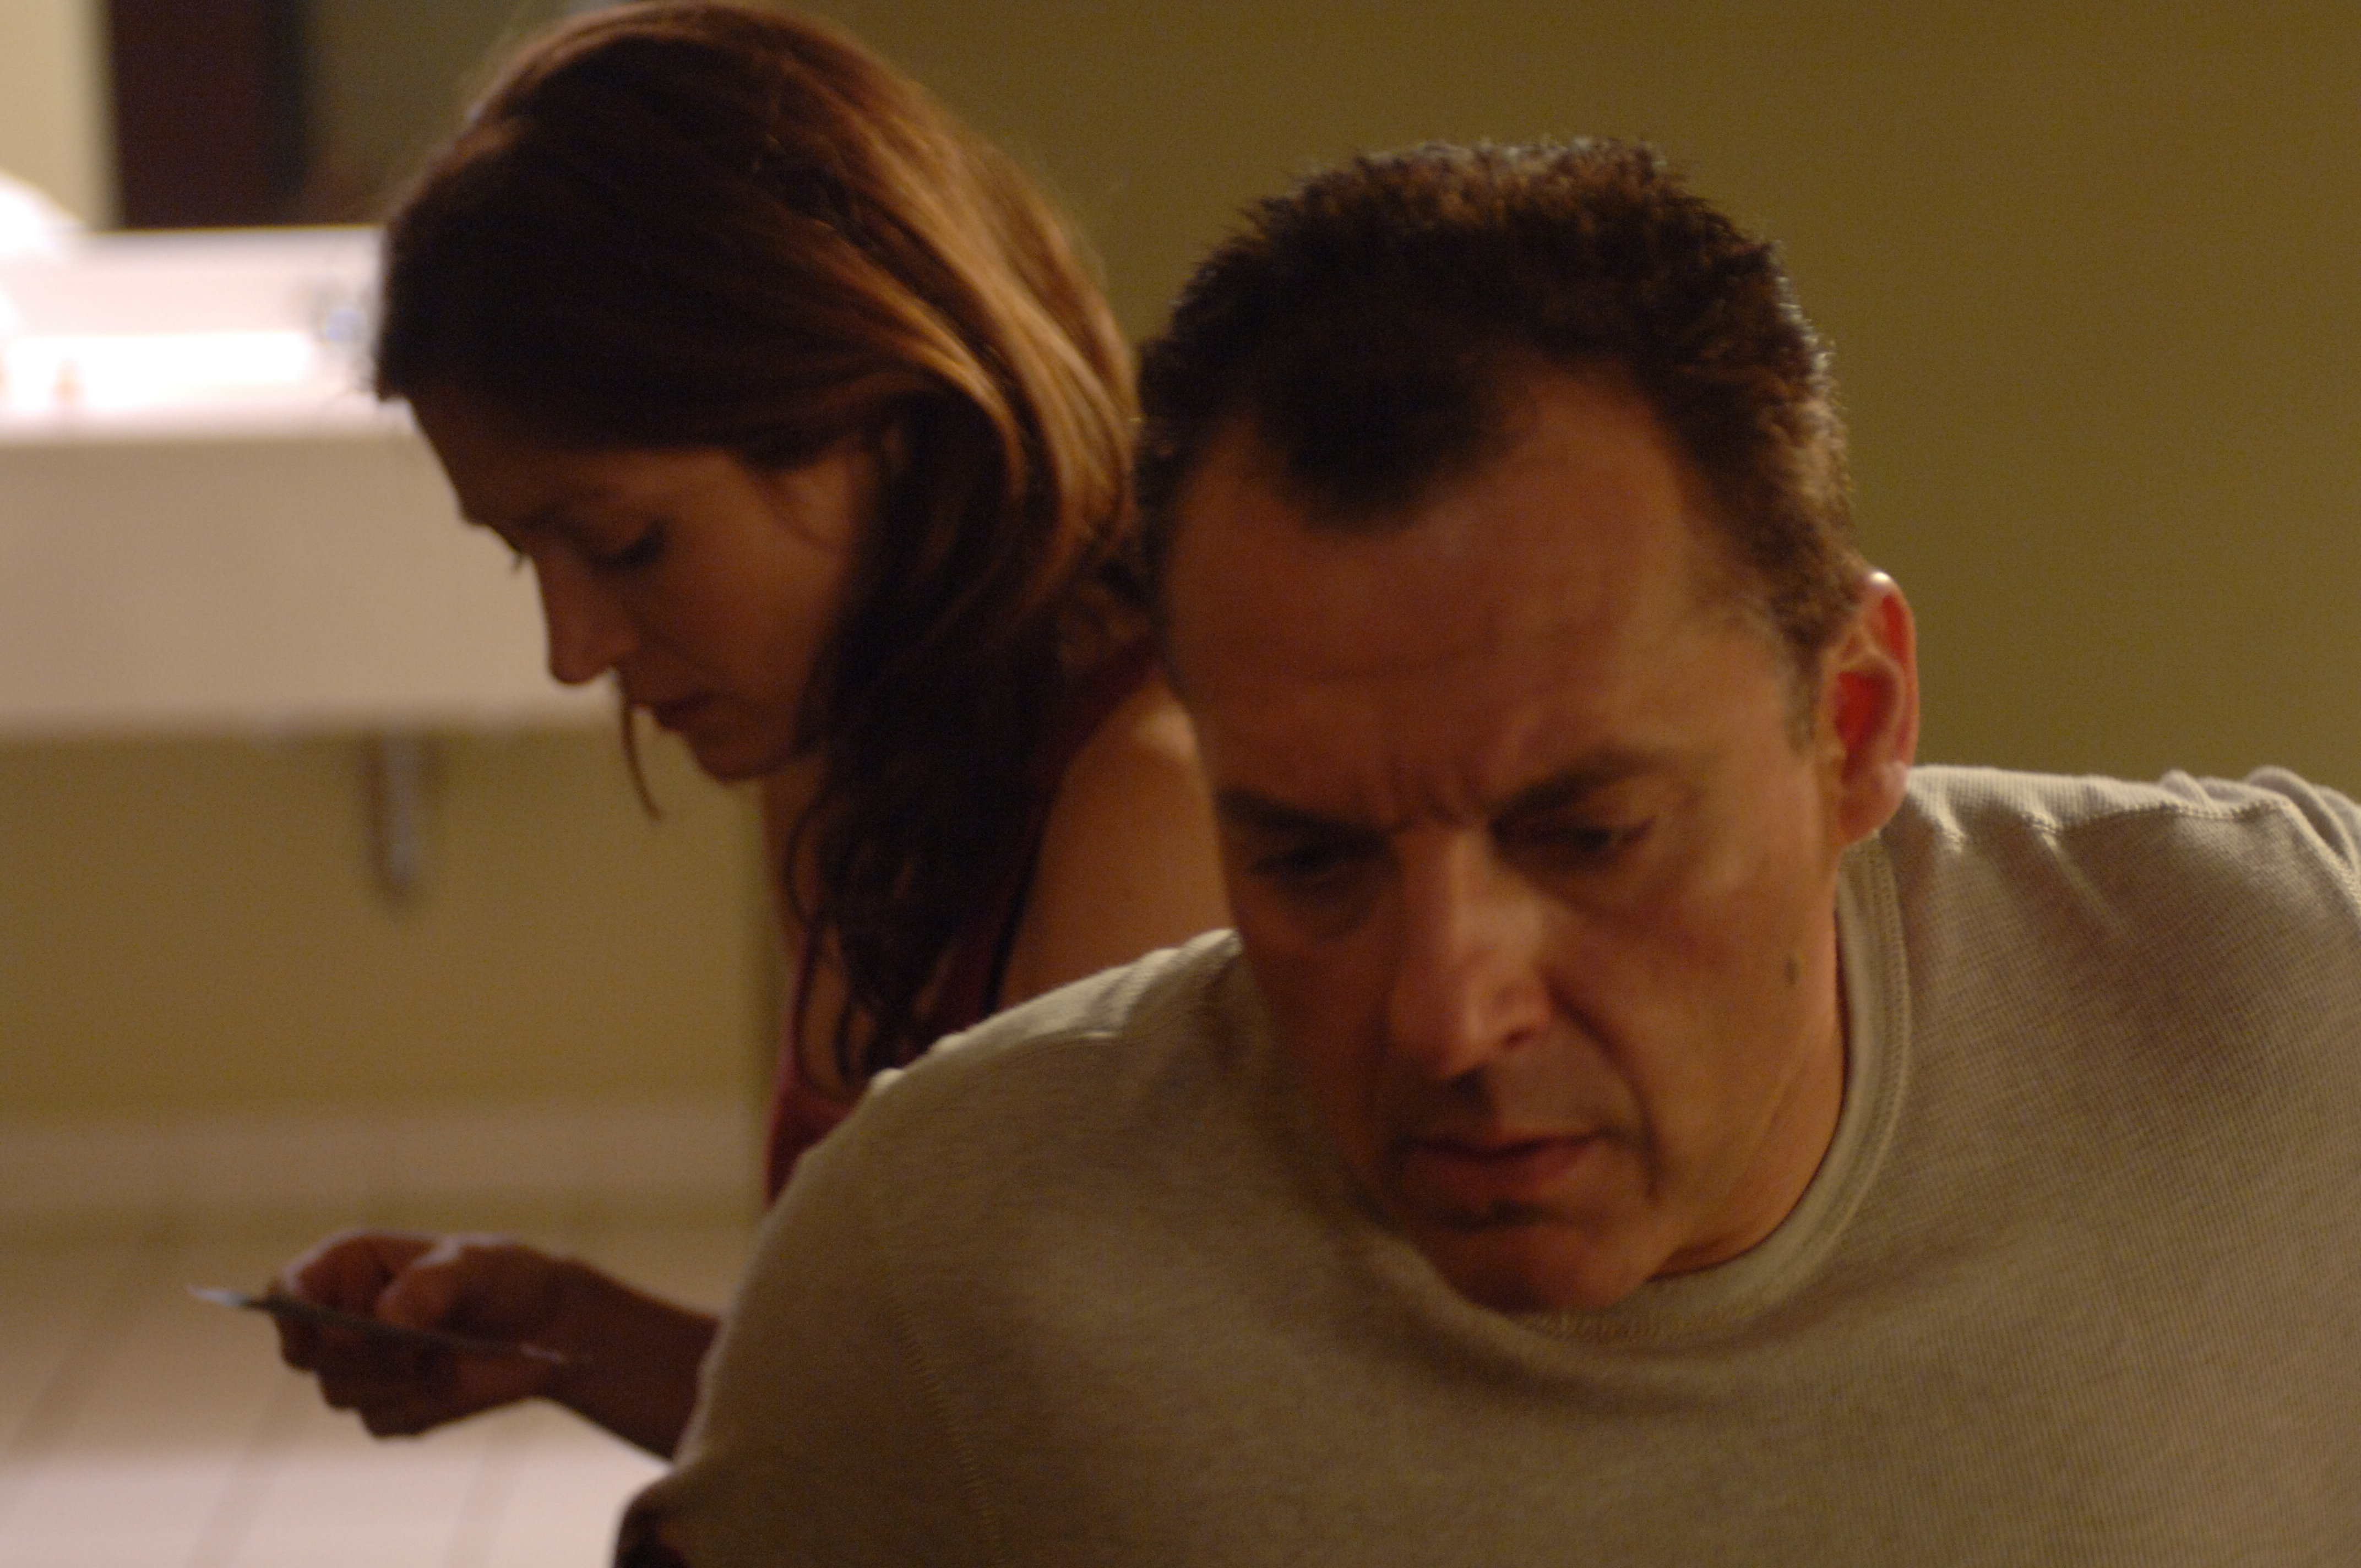 Tom Sizemore and Sasha Alexander in The Last Lullaby (2008)